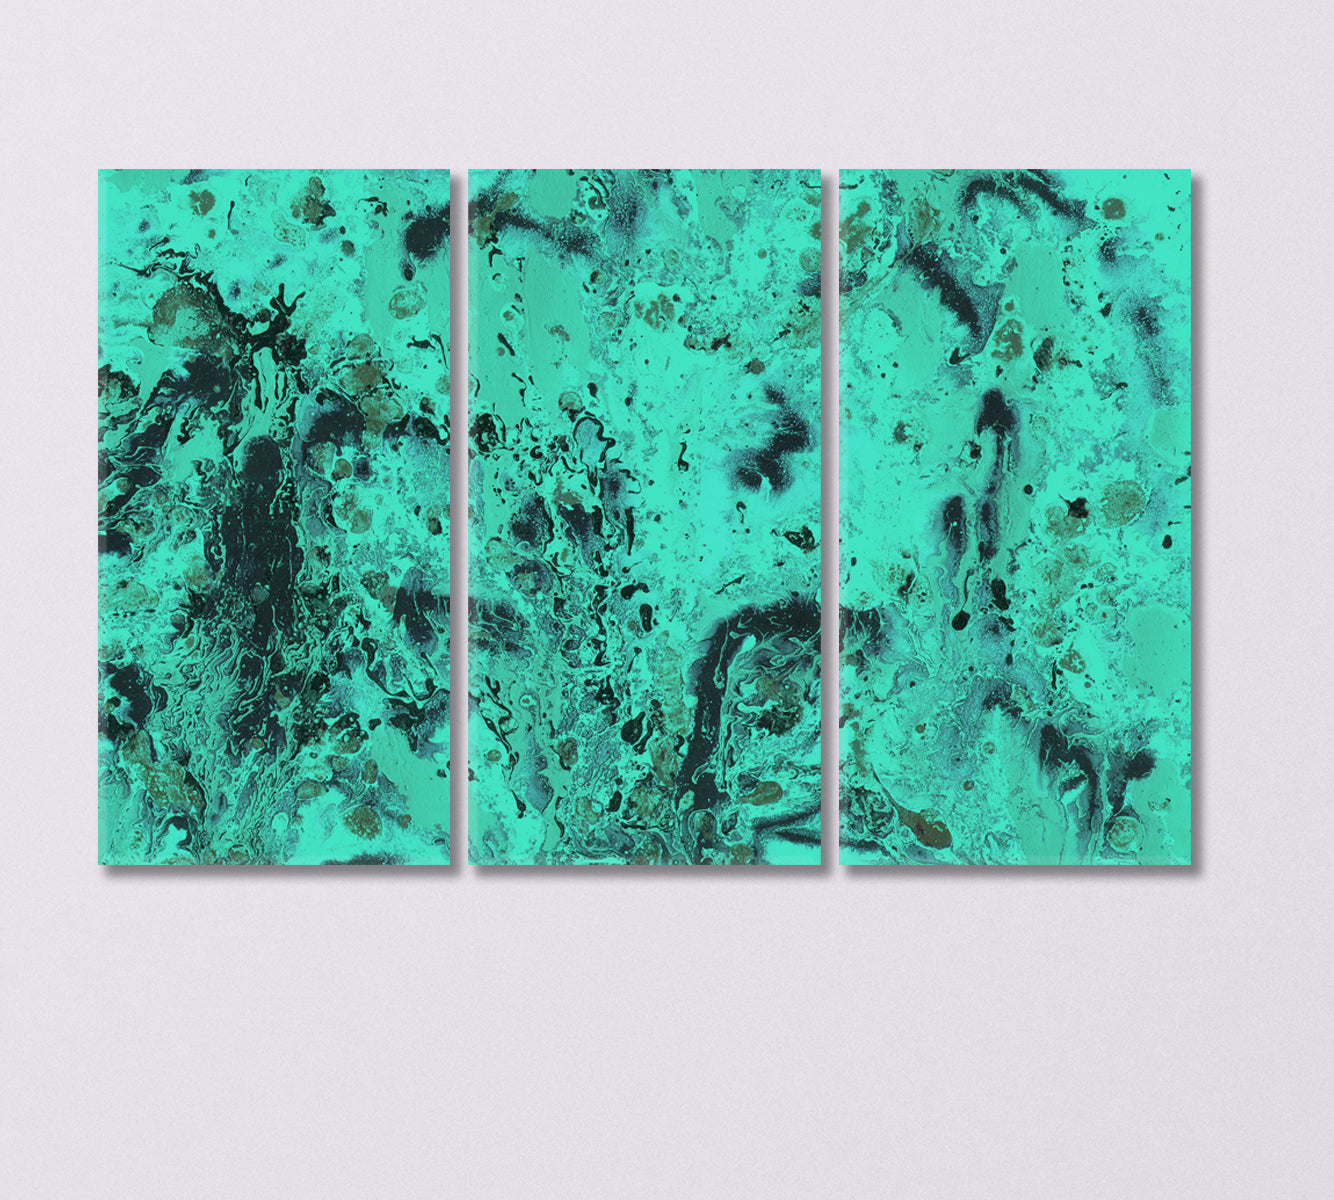 Abstract Turquoise Watercolor Splashes Canvas Print-Canvas Print-CetArt-3 Panels-36x24 inches-CetArt